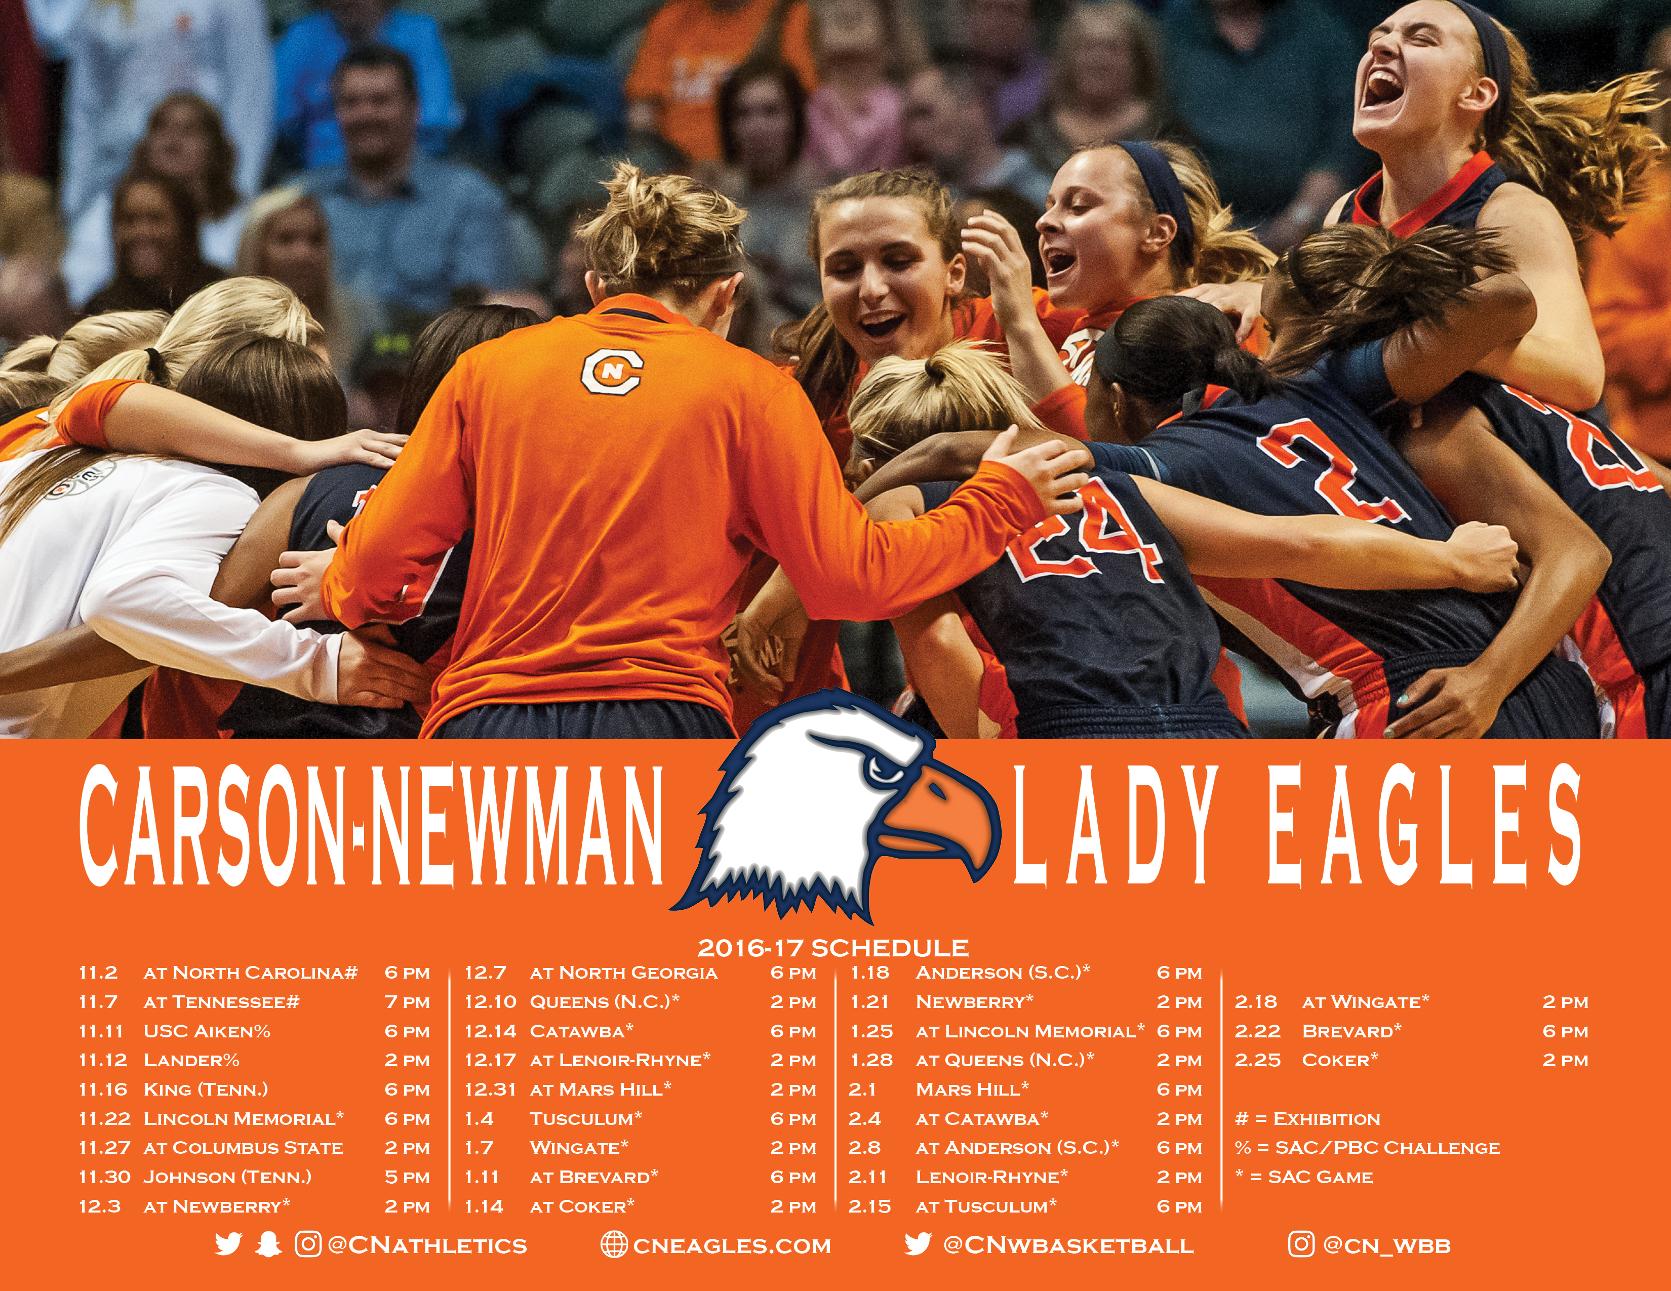 Lady Eagles debut balanced 2016-17 schedule